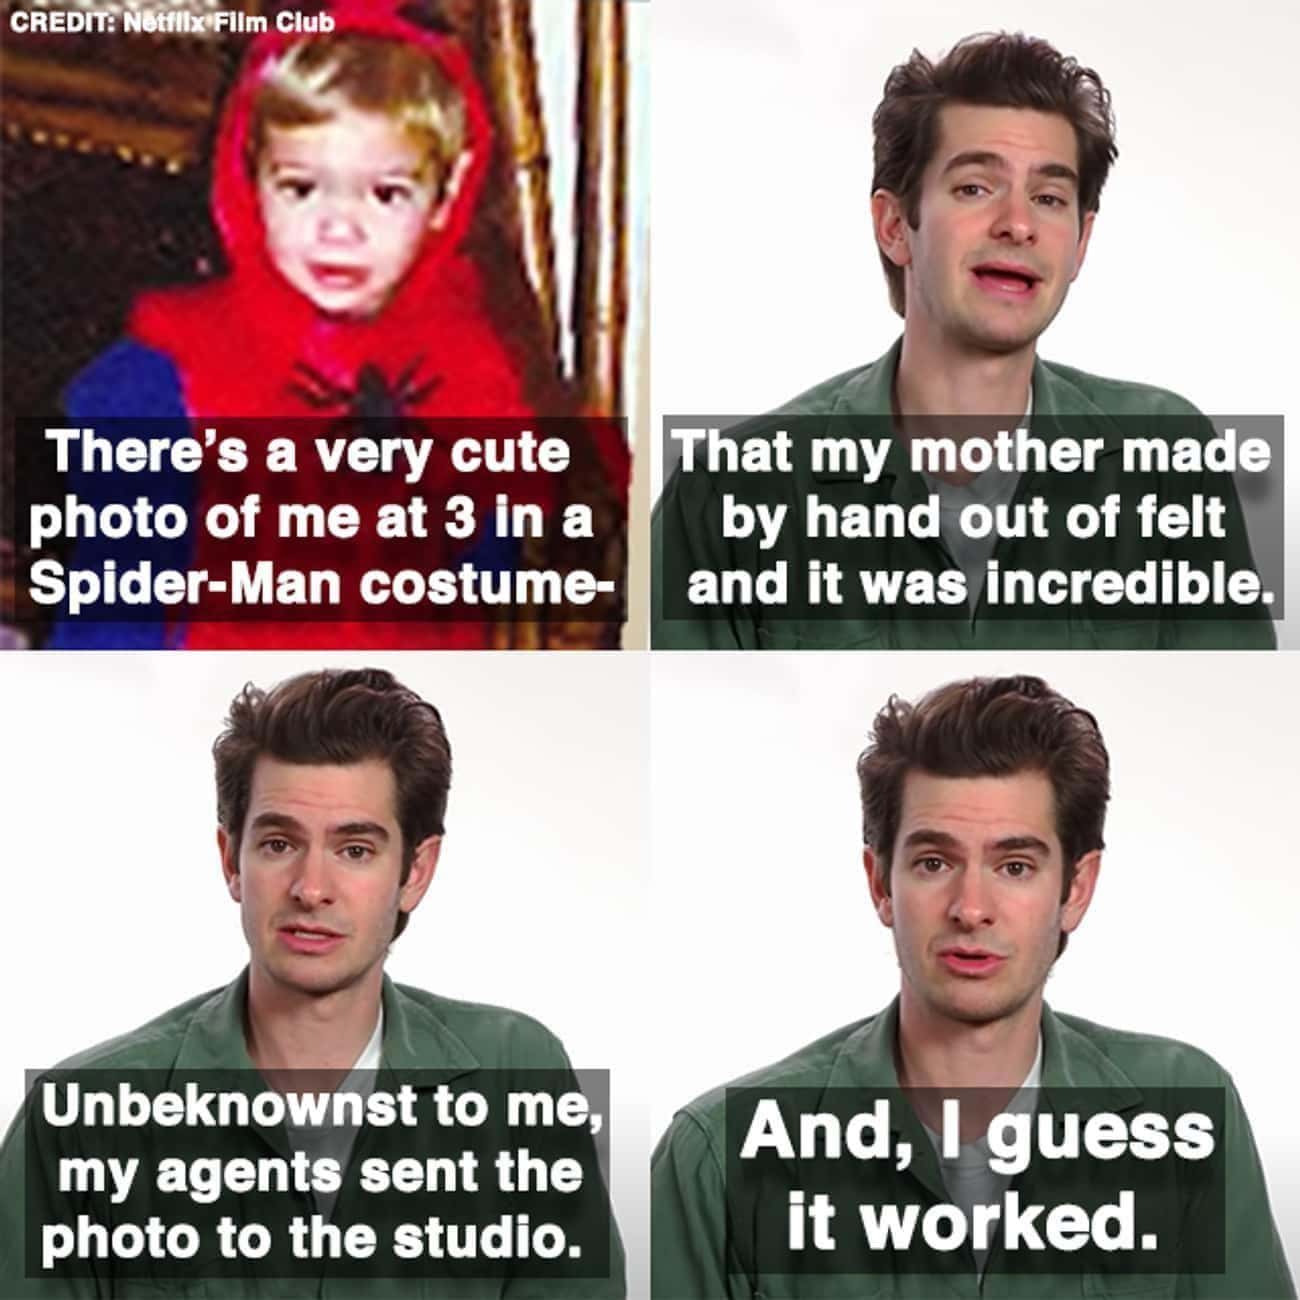 He Indirectly Got The Role Of Spiderman Through His Mother's Sewing